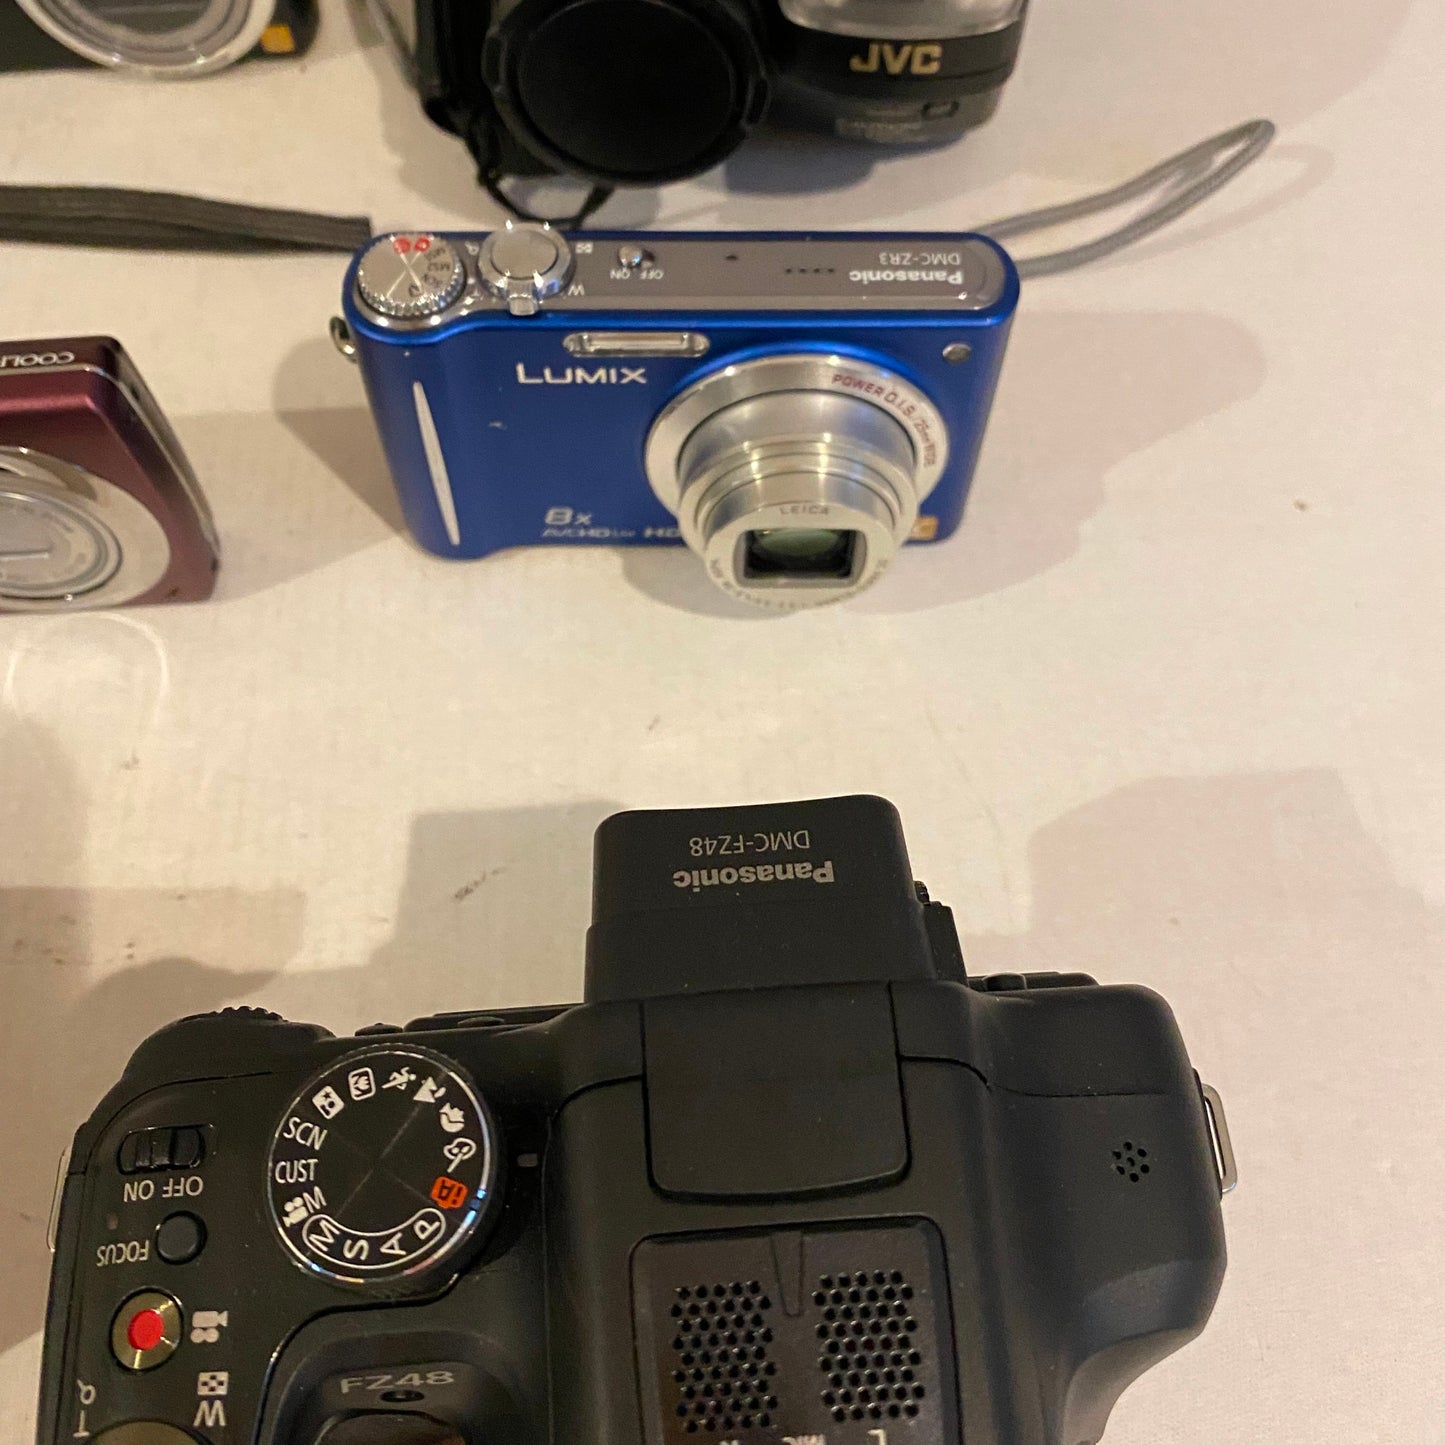 As is for Parts - Camcorder Digital Camera Lot